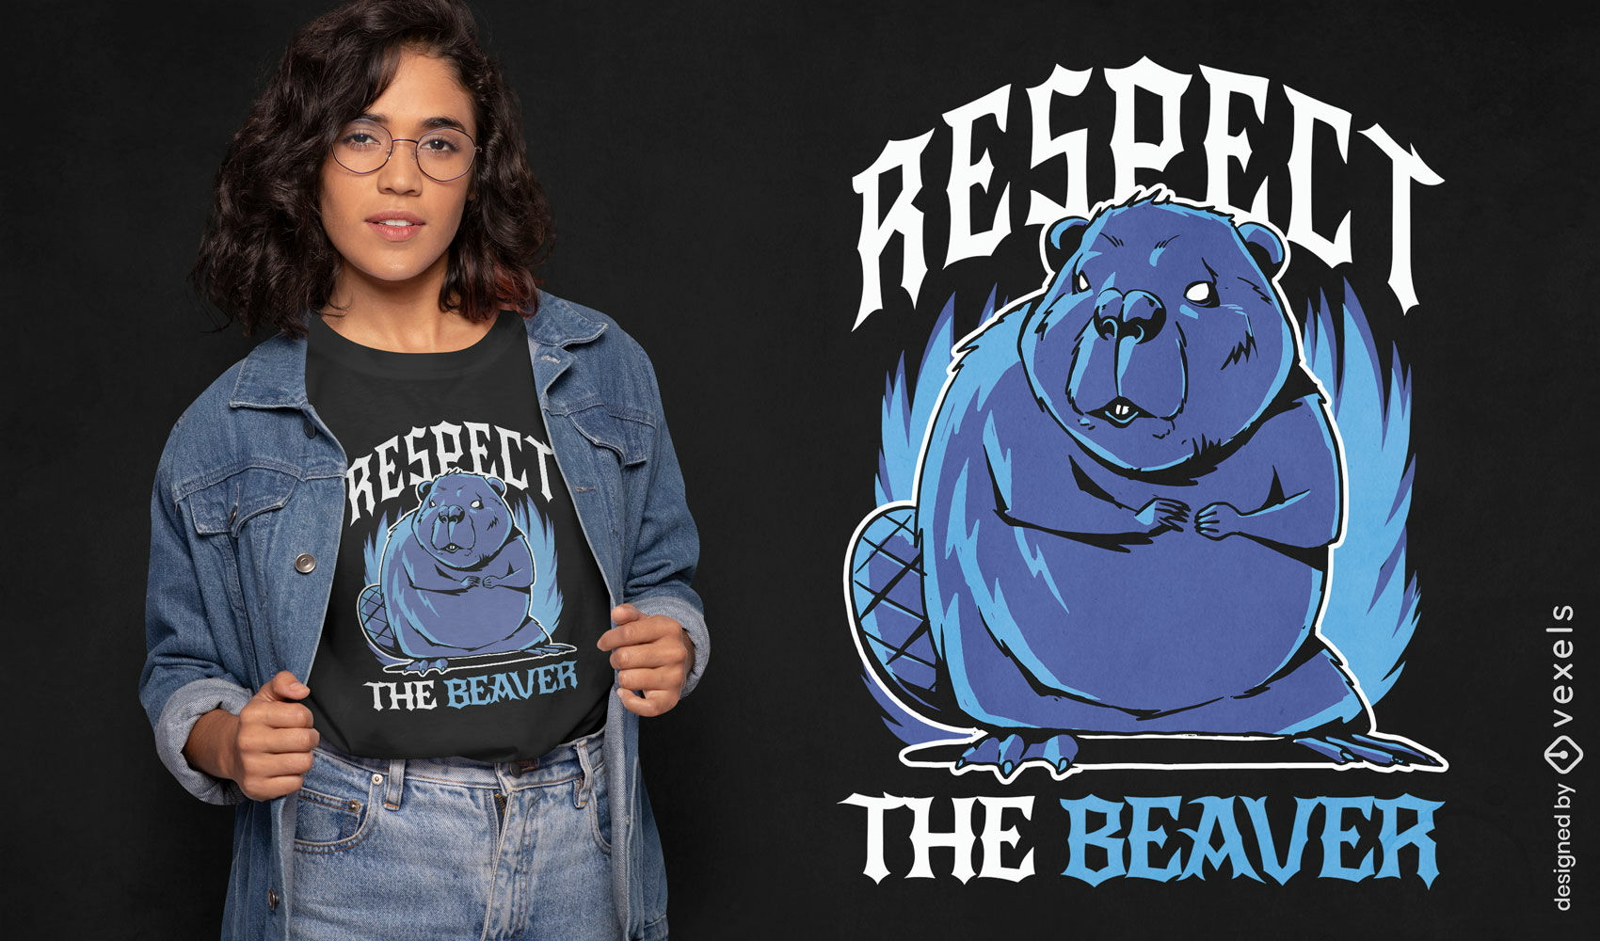 Respect the beaver quote t-shirt design